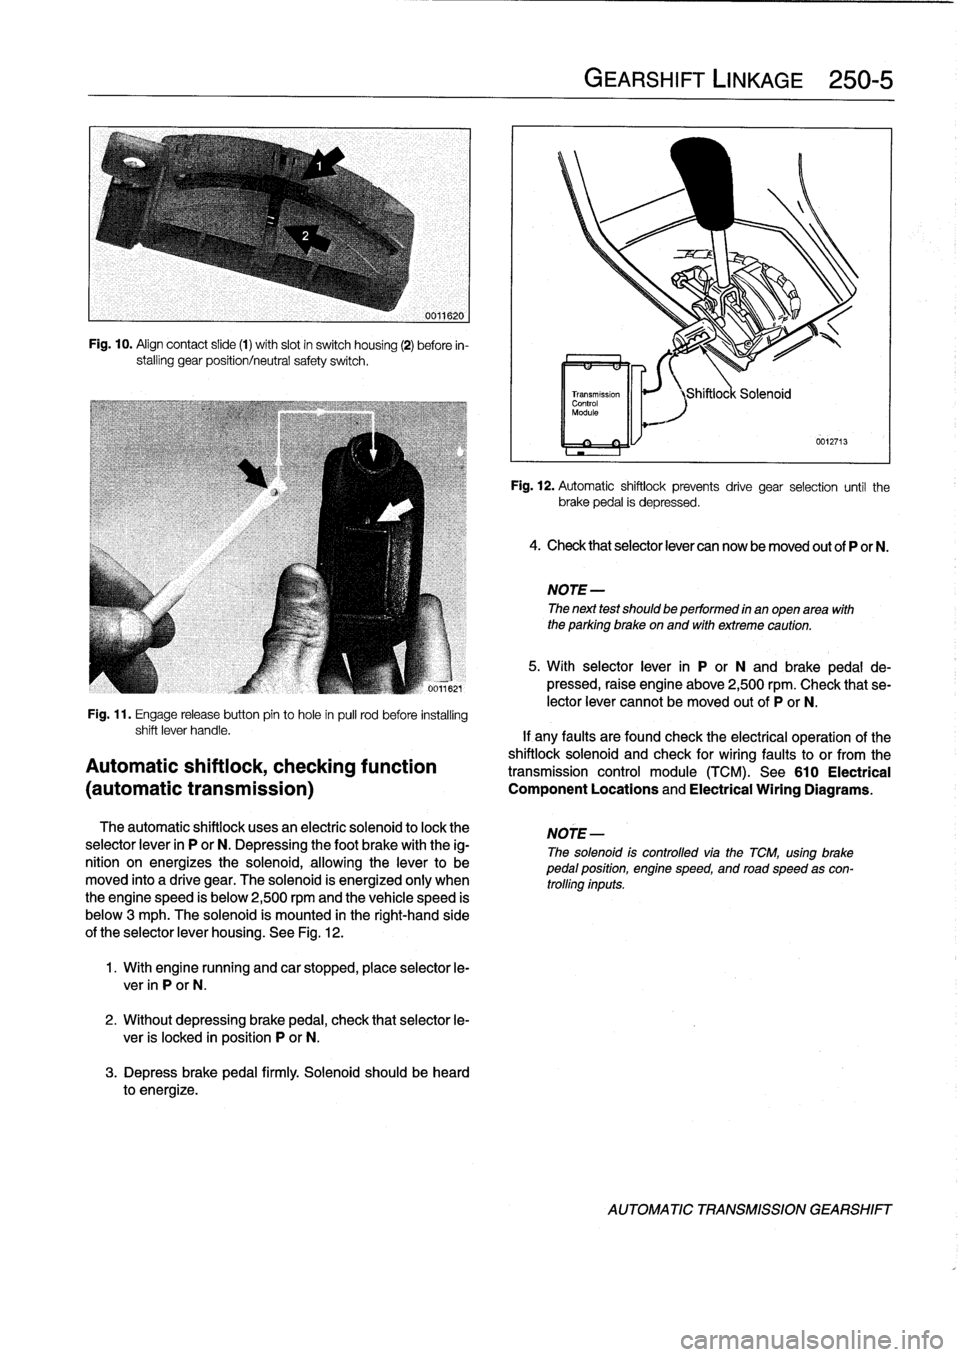 BMW M3 1993 E36 Workshop Manual 
Fig
.
10
.
Align
contact
slide
(1)
with
slot
in
switch
housing
(2)
before
in-
stalling
gear
position/neutral
safety
switch
.

Fig
.
11
.
Engage
release
button
pin
to
hole
in
pull
rod
before
installin